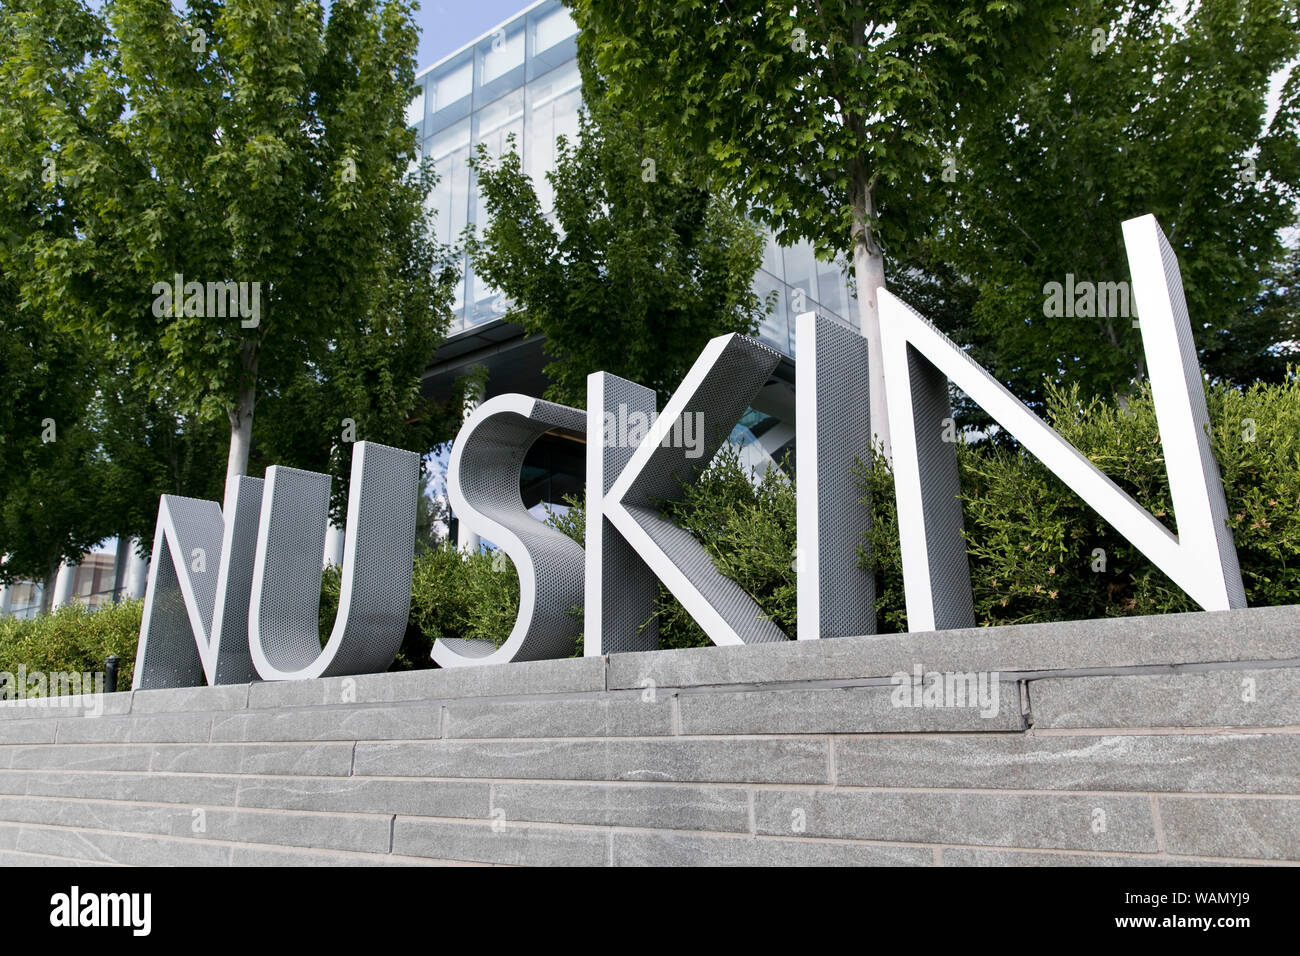 A logo sign outside of the headquarters of Nu Skin Enterprises in Provo, Utah on July 29, 2019. Stock Photo